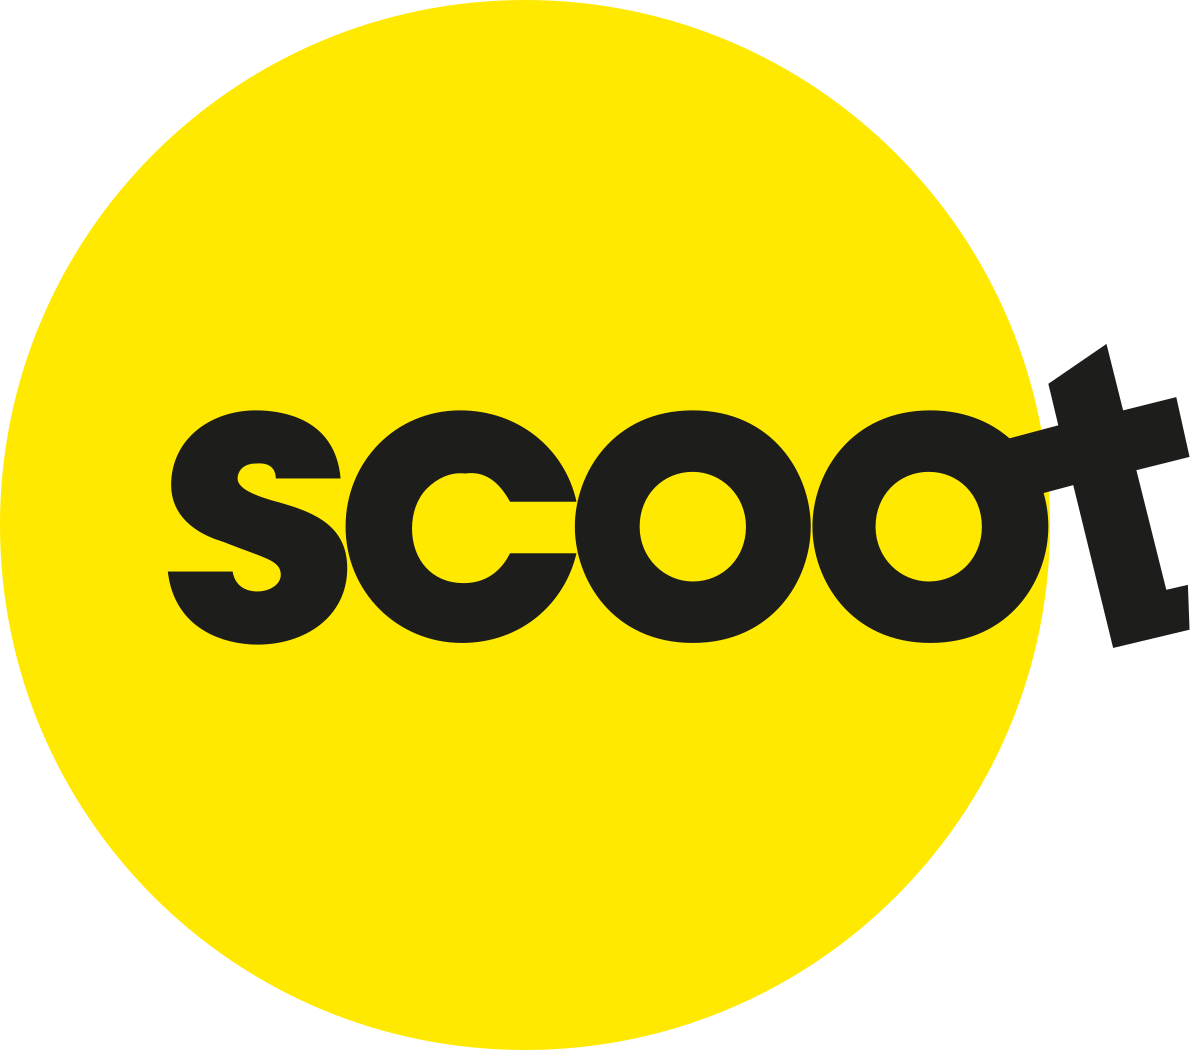 Starting with a Yellow Circle Logo - Scoot